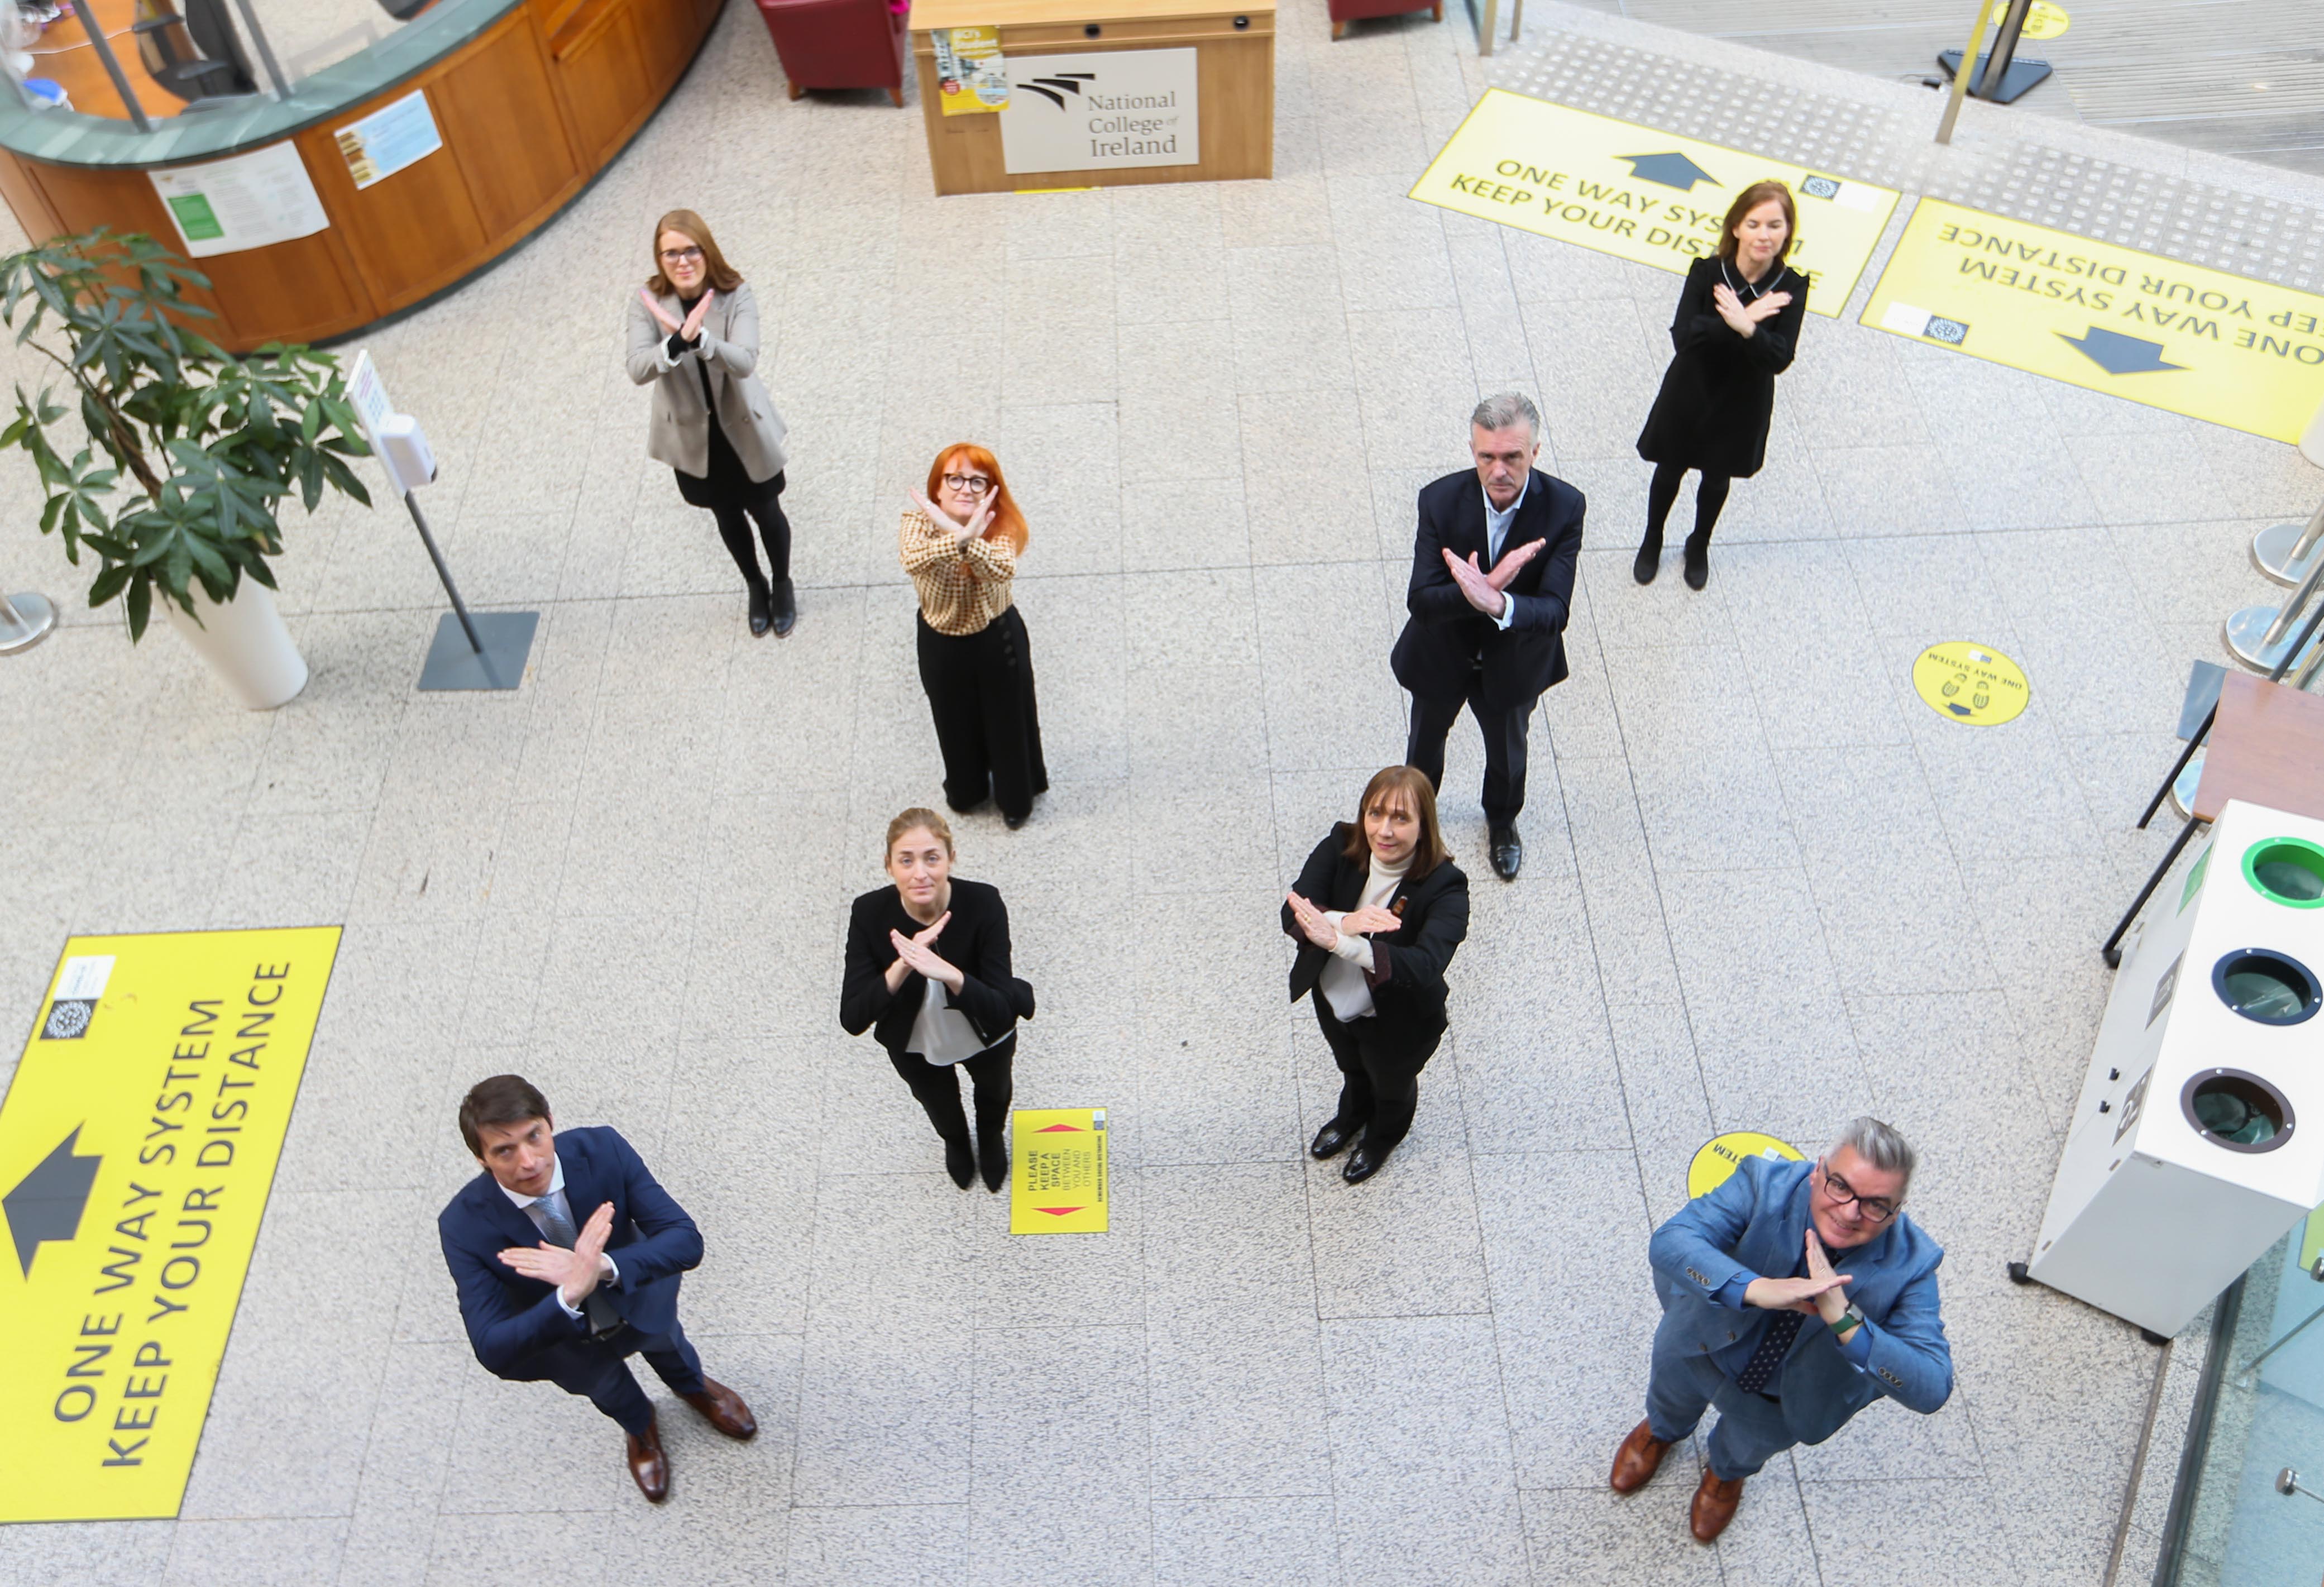 Senior staff from NCI and from Amundi Ireland standing in an X formation to symbolise Break the Bias on IWD2022